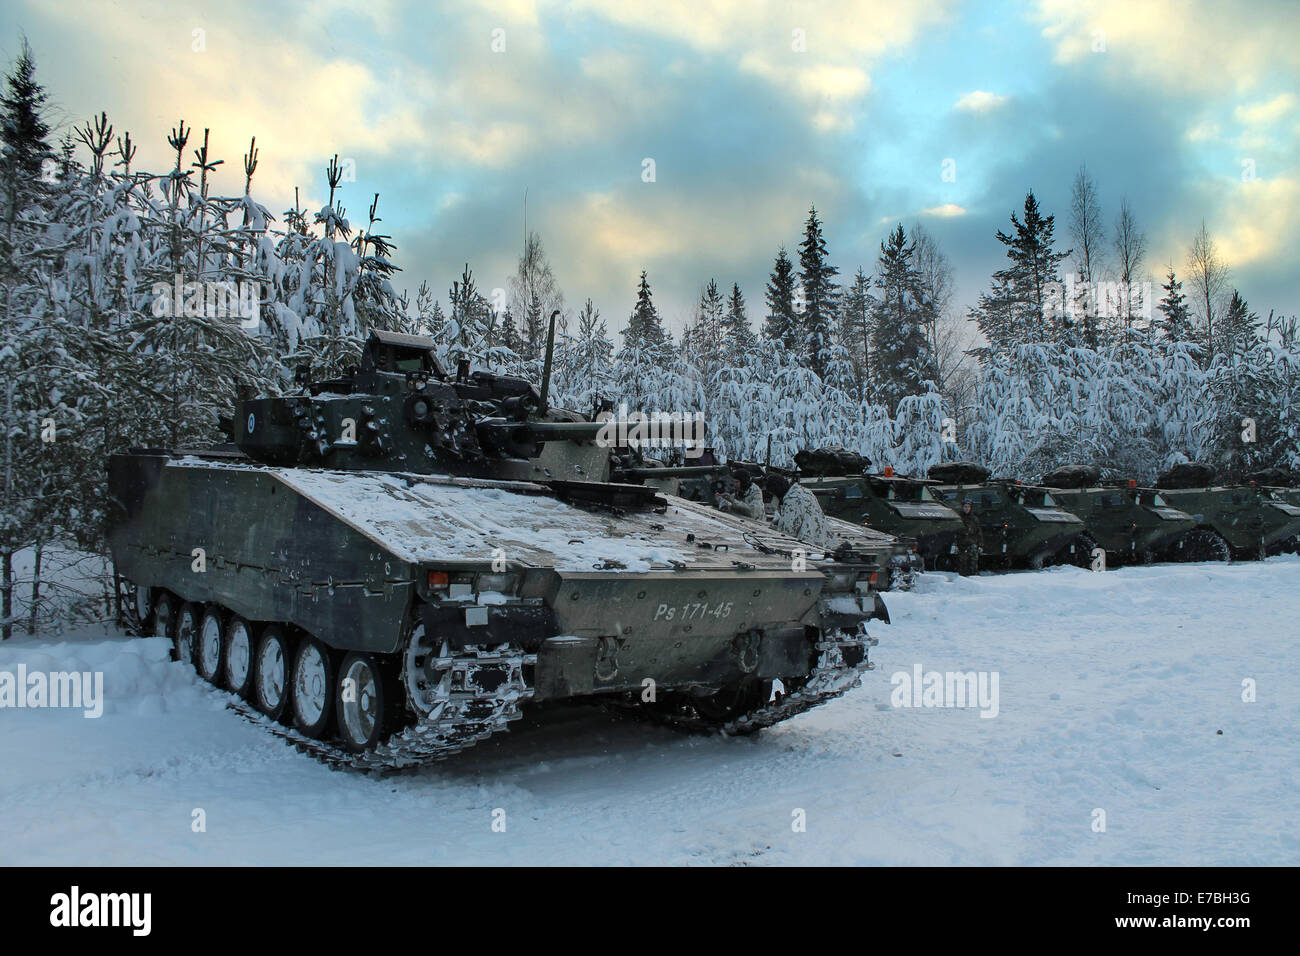 Finnish Defence Forces' army CV90 tank Stock Photo